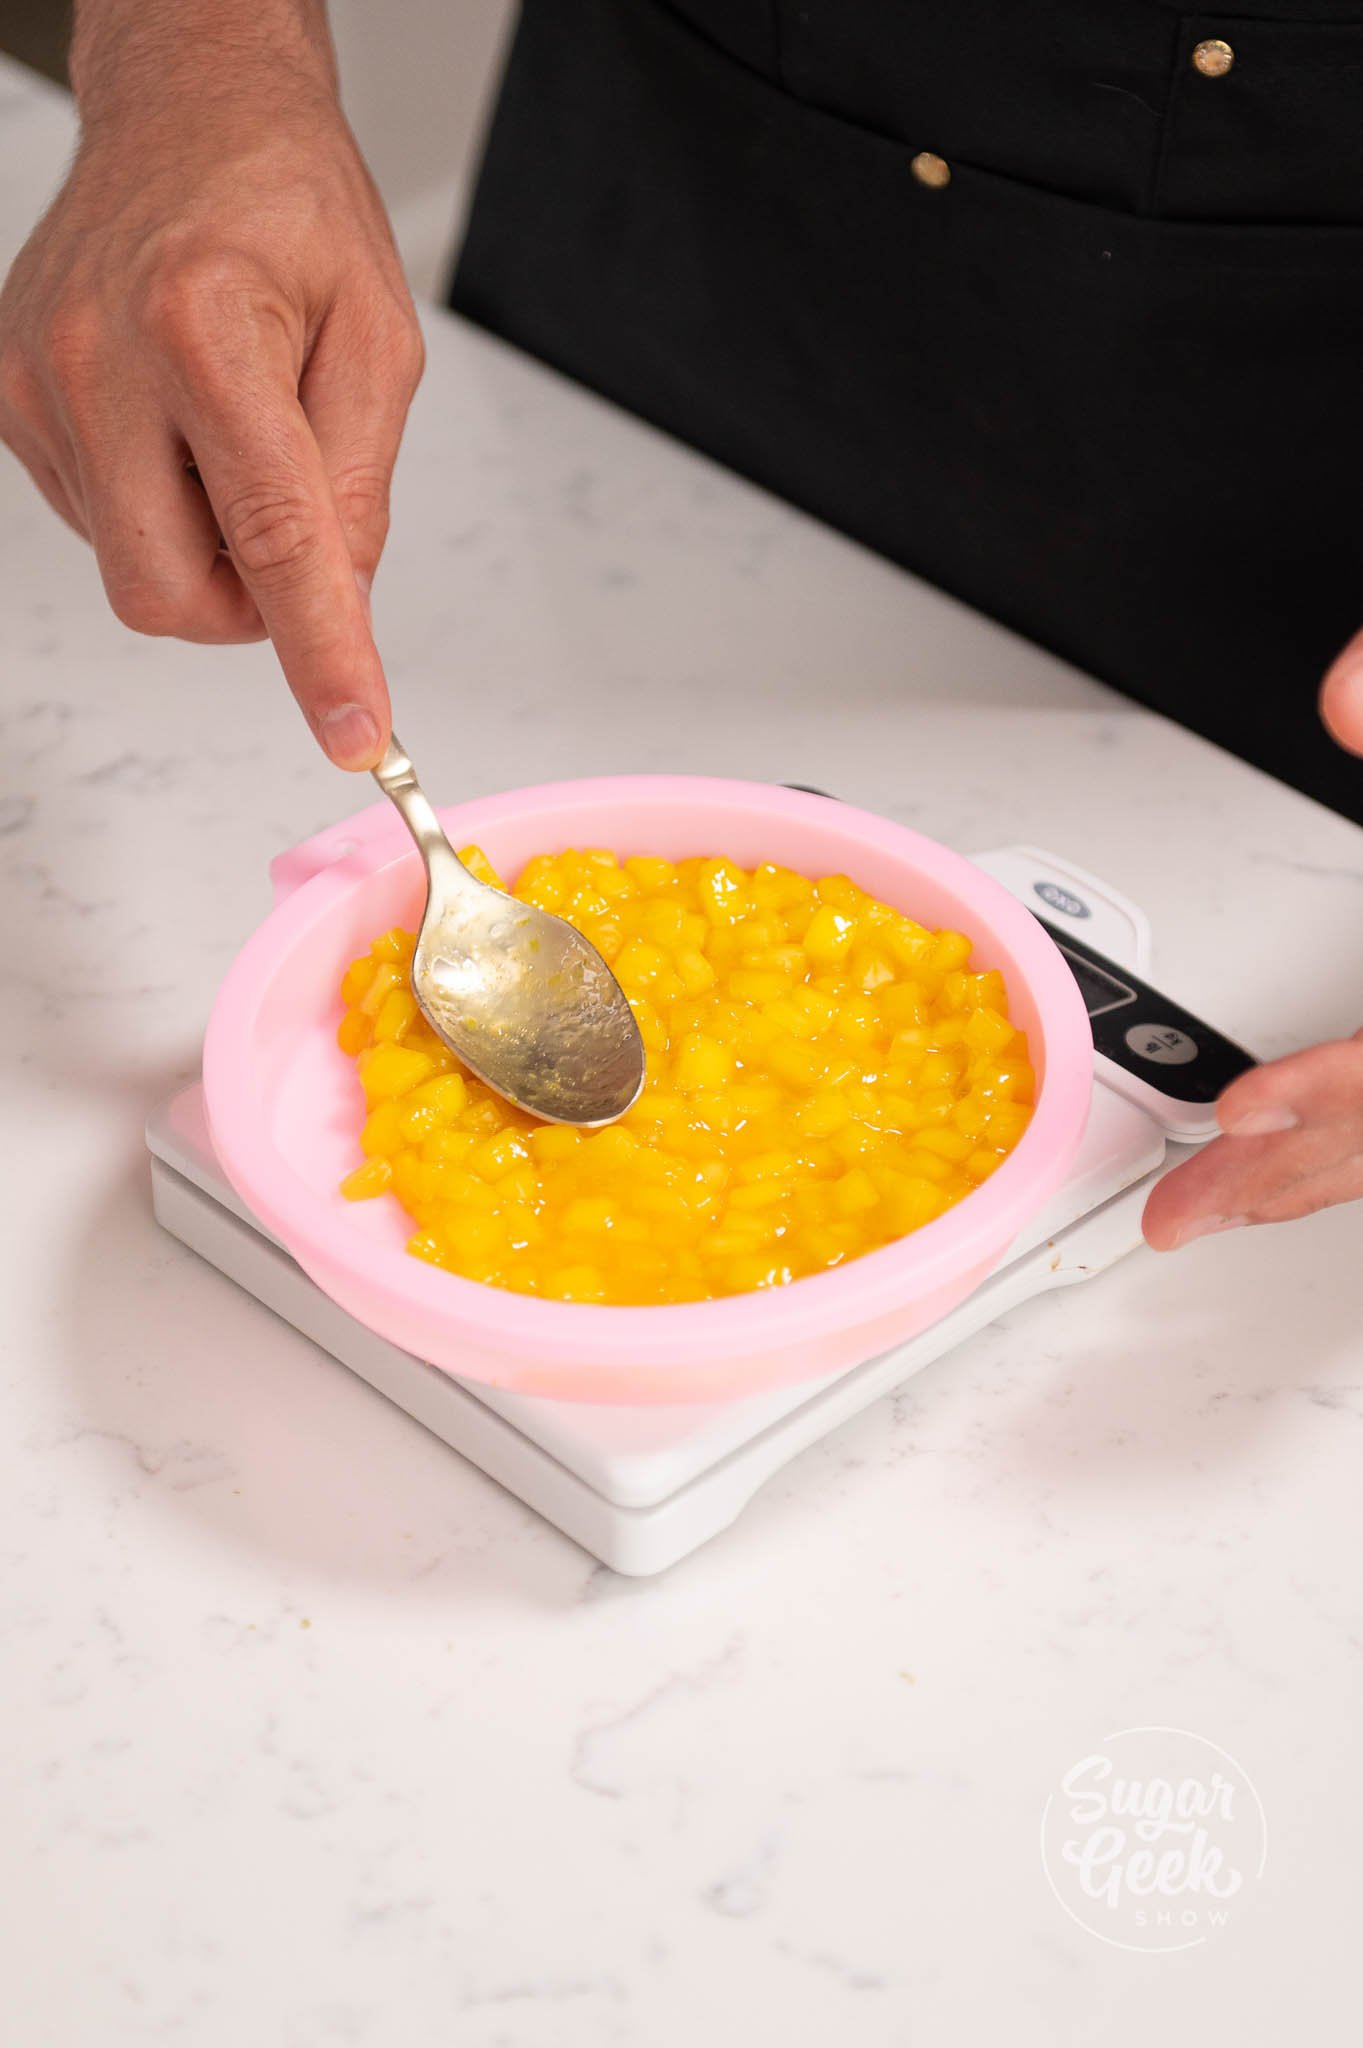 hand using spoon to spread compote in silicone mold.